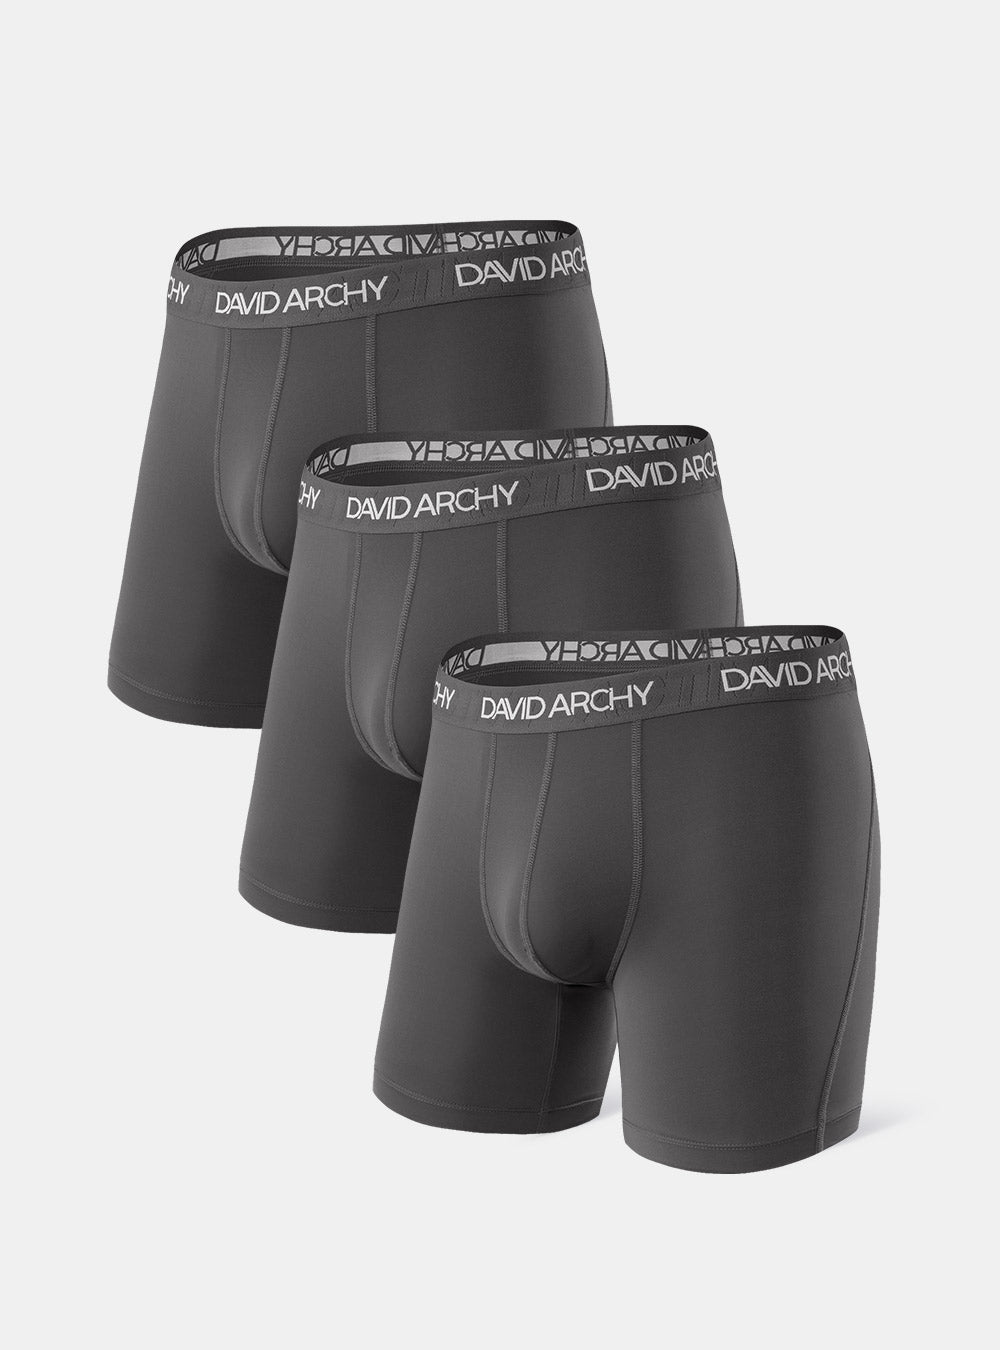 3 Packs Boxer Briefs Quick Dry Sports David Archy Mens Ultra Soft